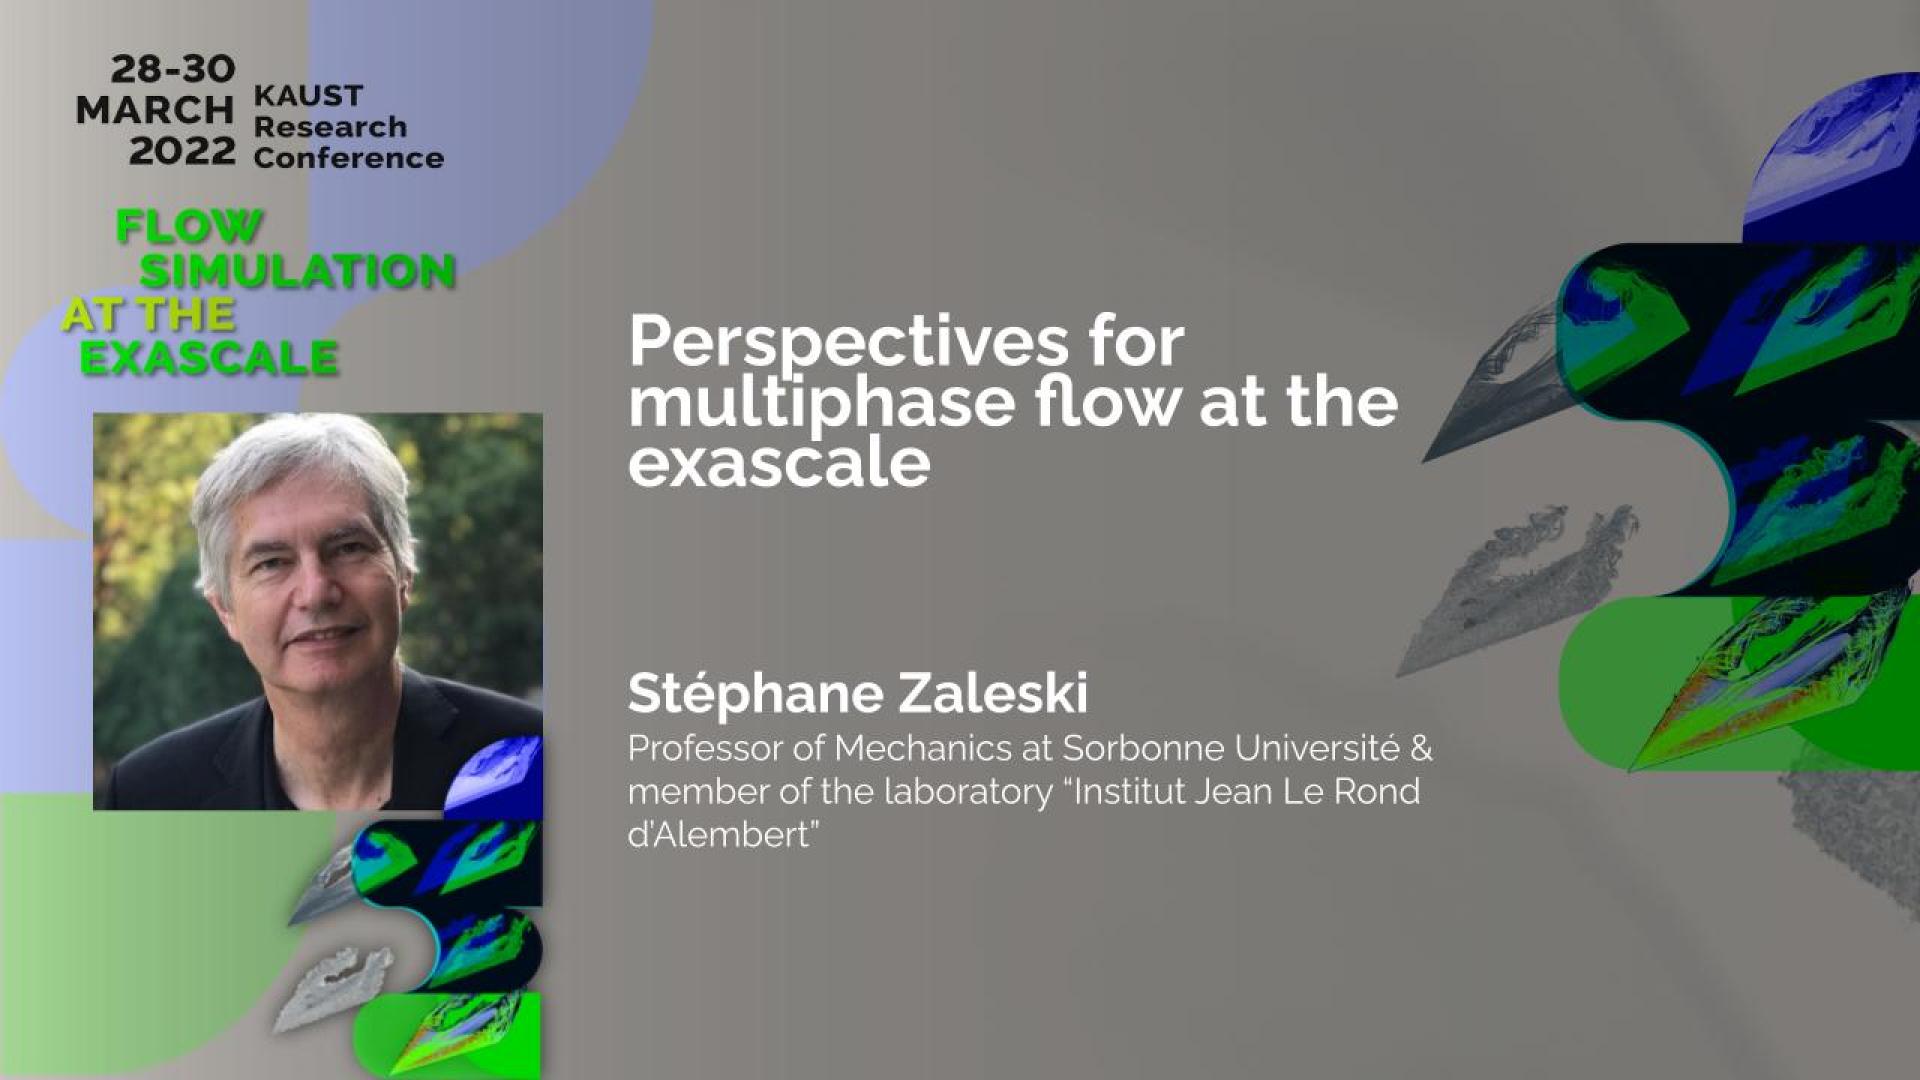 Perspectives for multiphase flow at the exascale Stéphane Zaleski